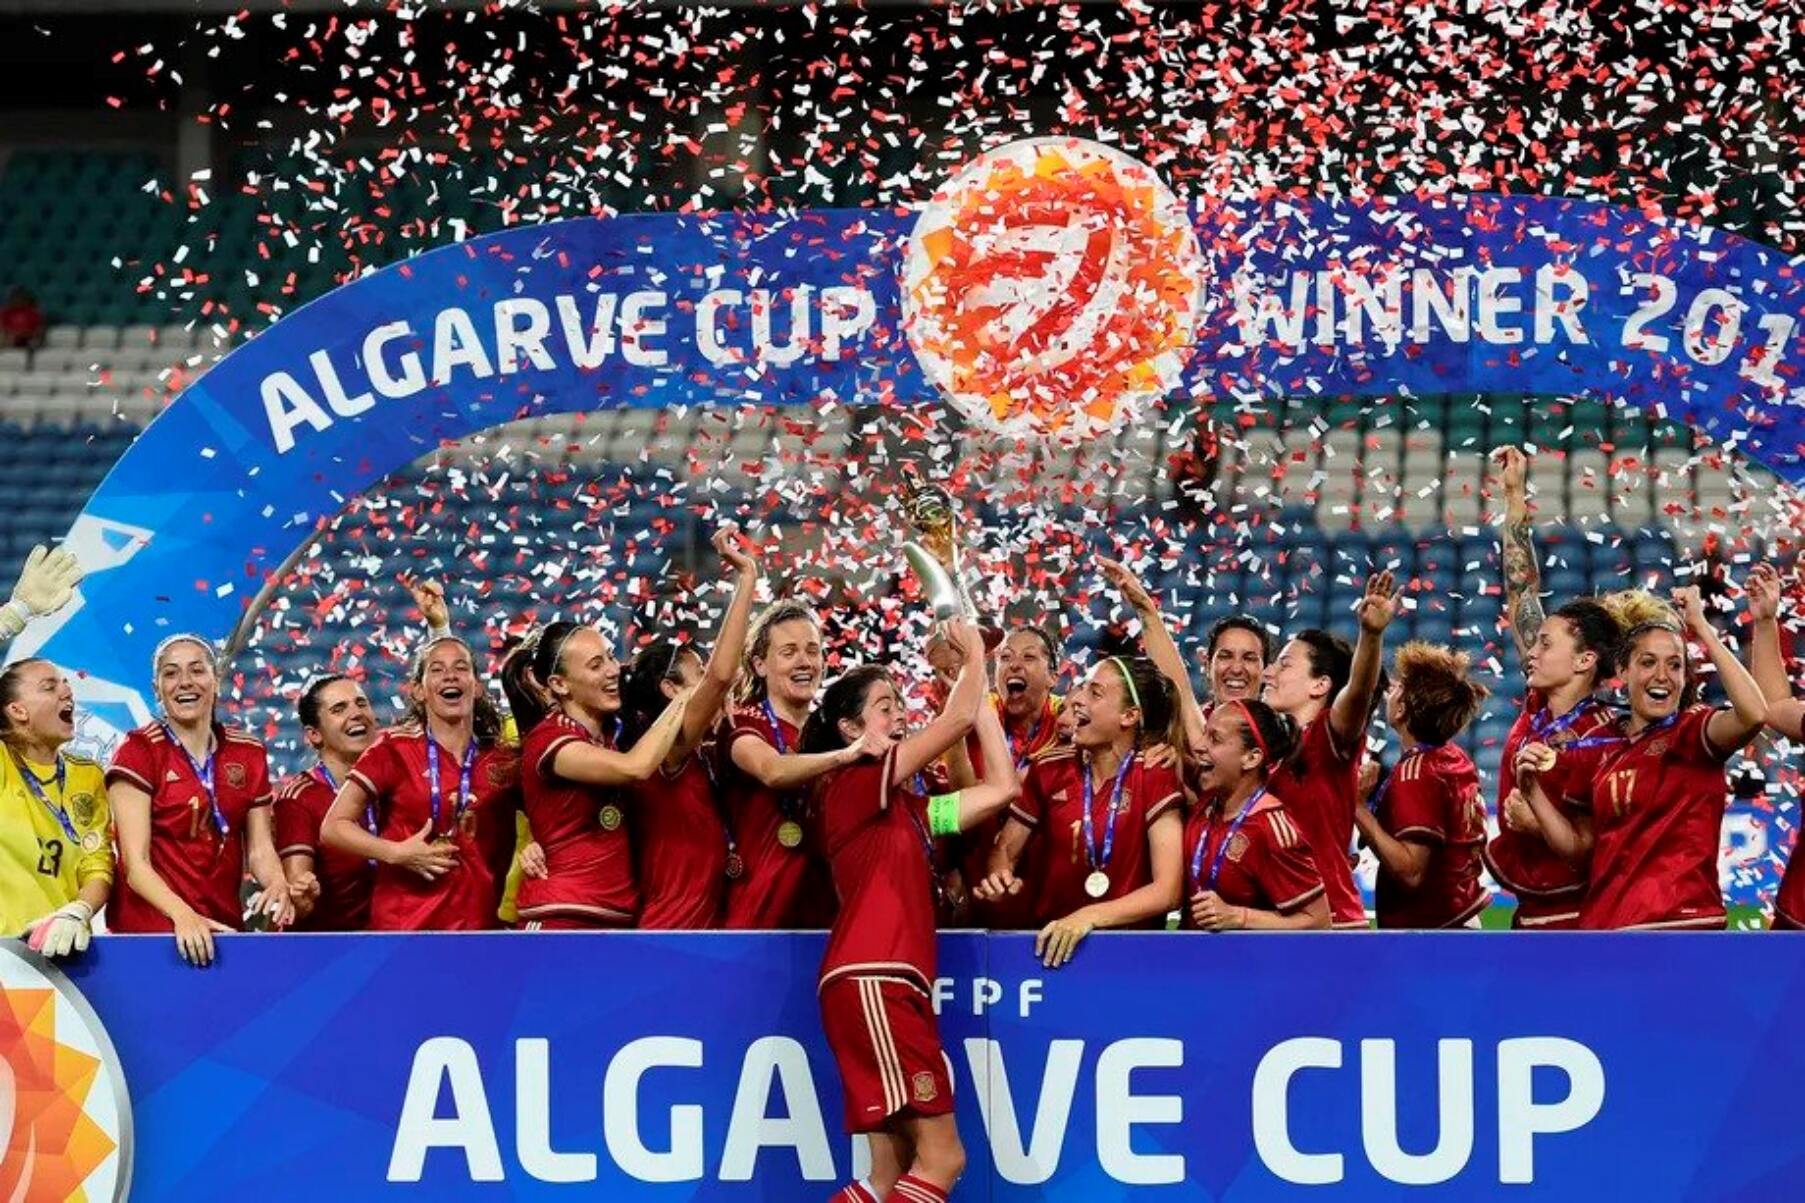 17 Facts About Algarve Cup - Facts.net